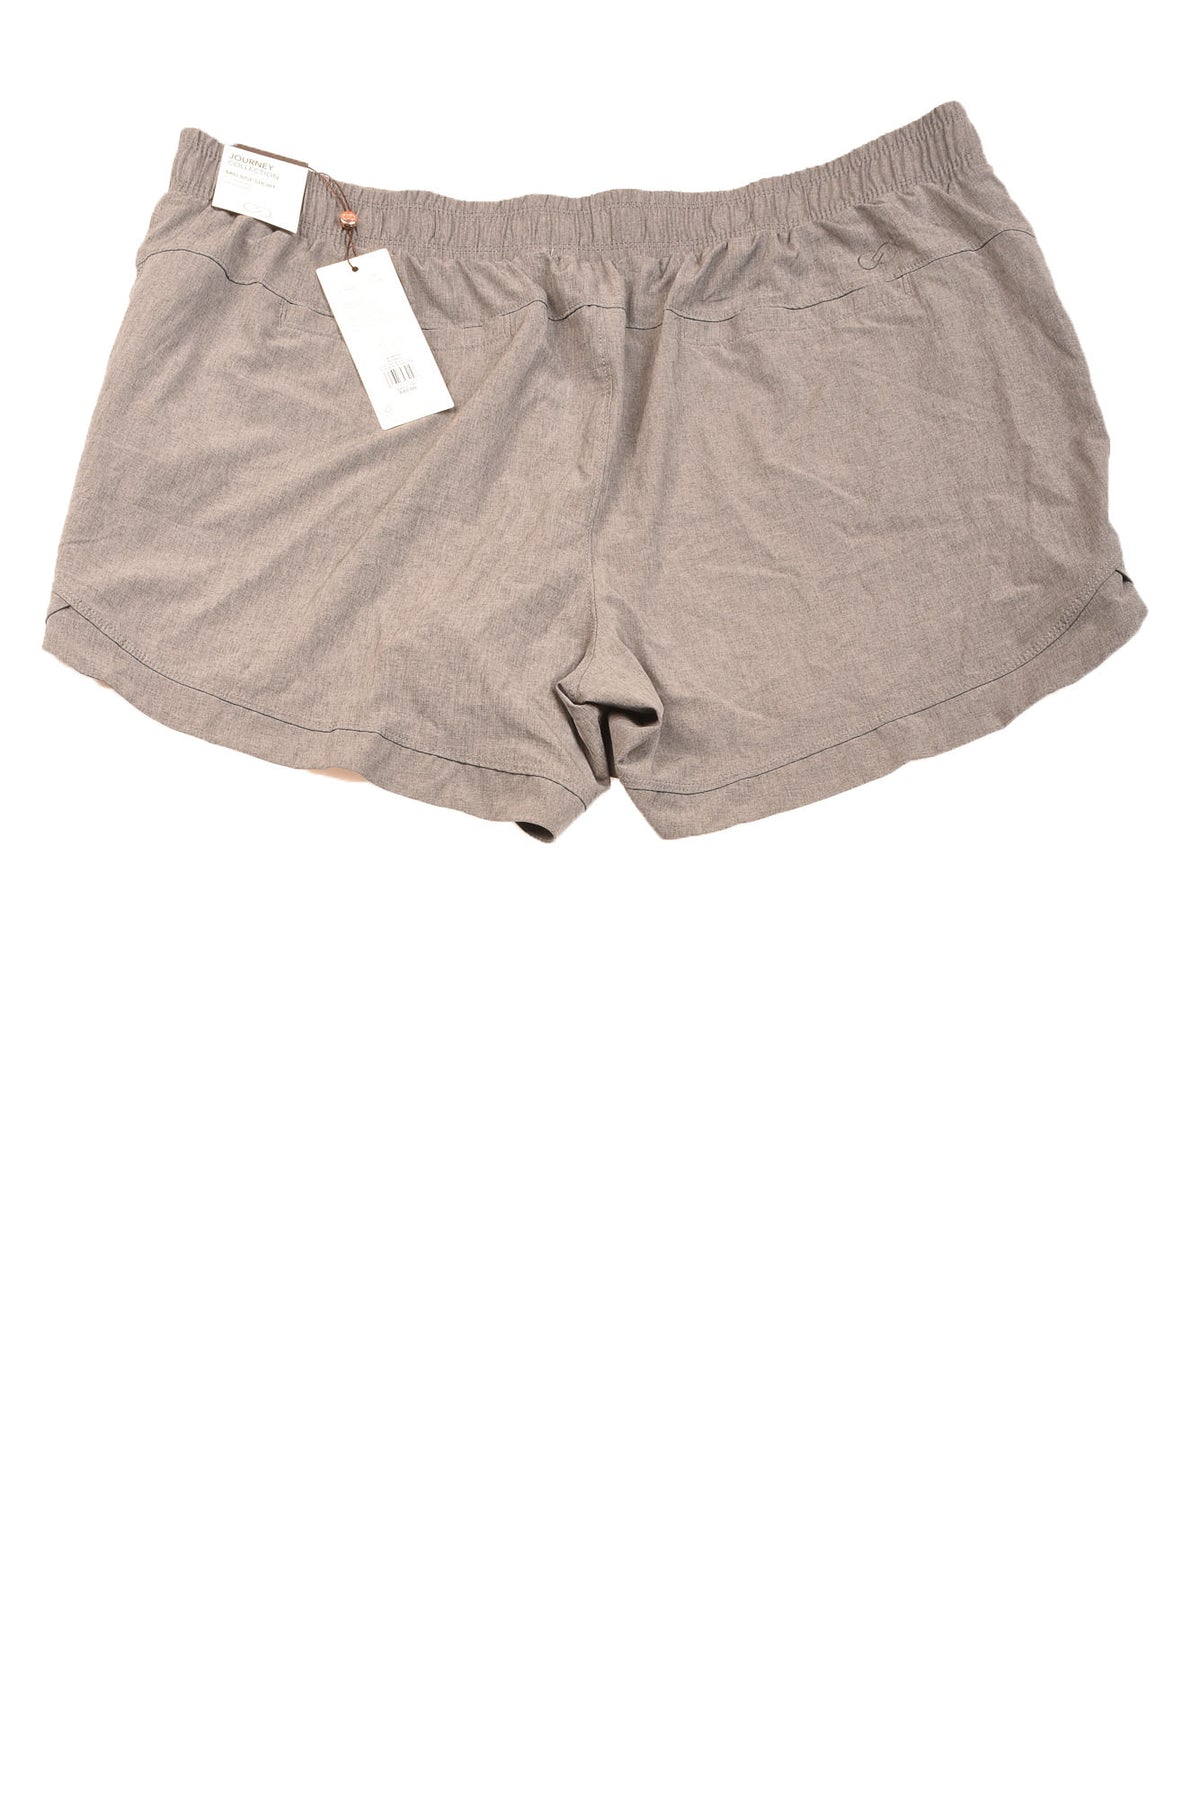 Women's Activewear Shorts By Calia - Your Designer Thrift